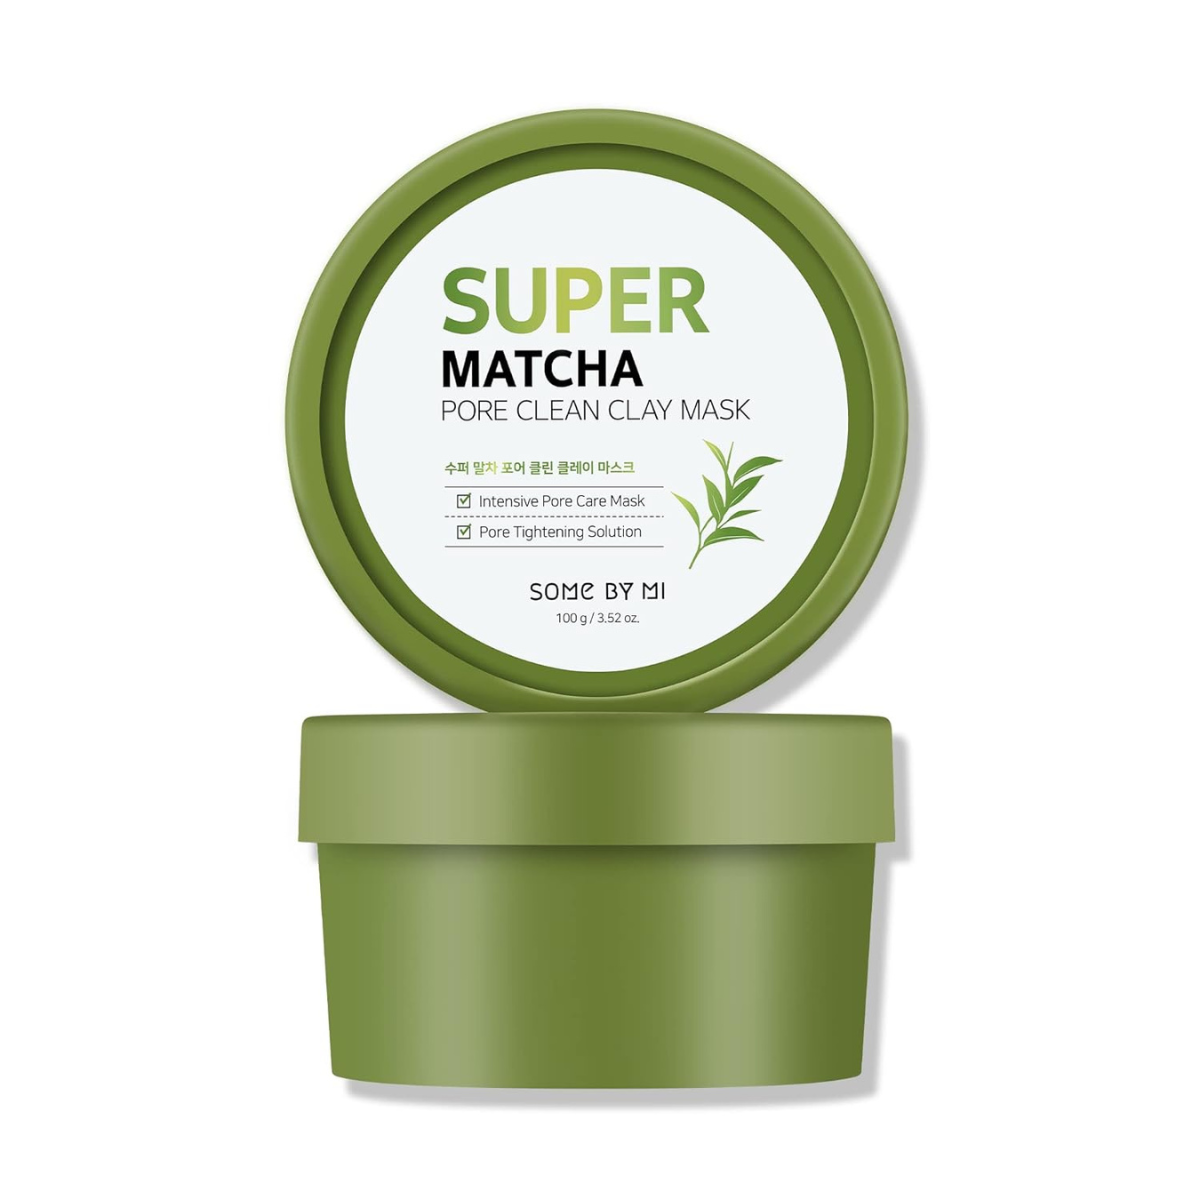 Some by Mi - Super Matcha Pore Clean Clay Mask - 100g